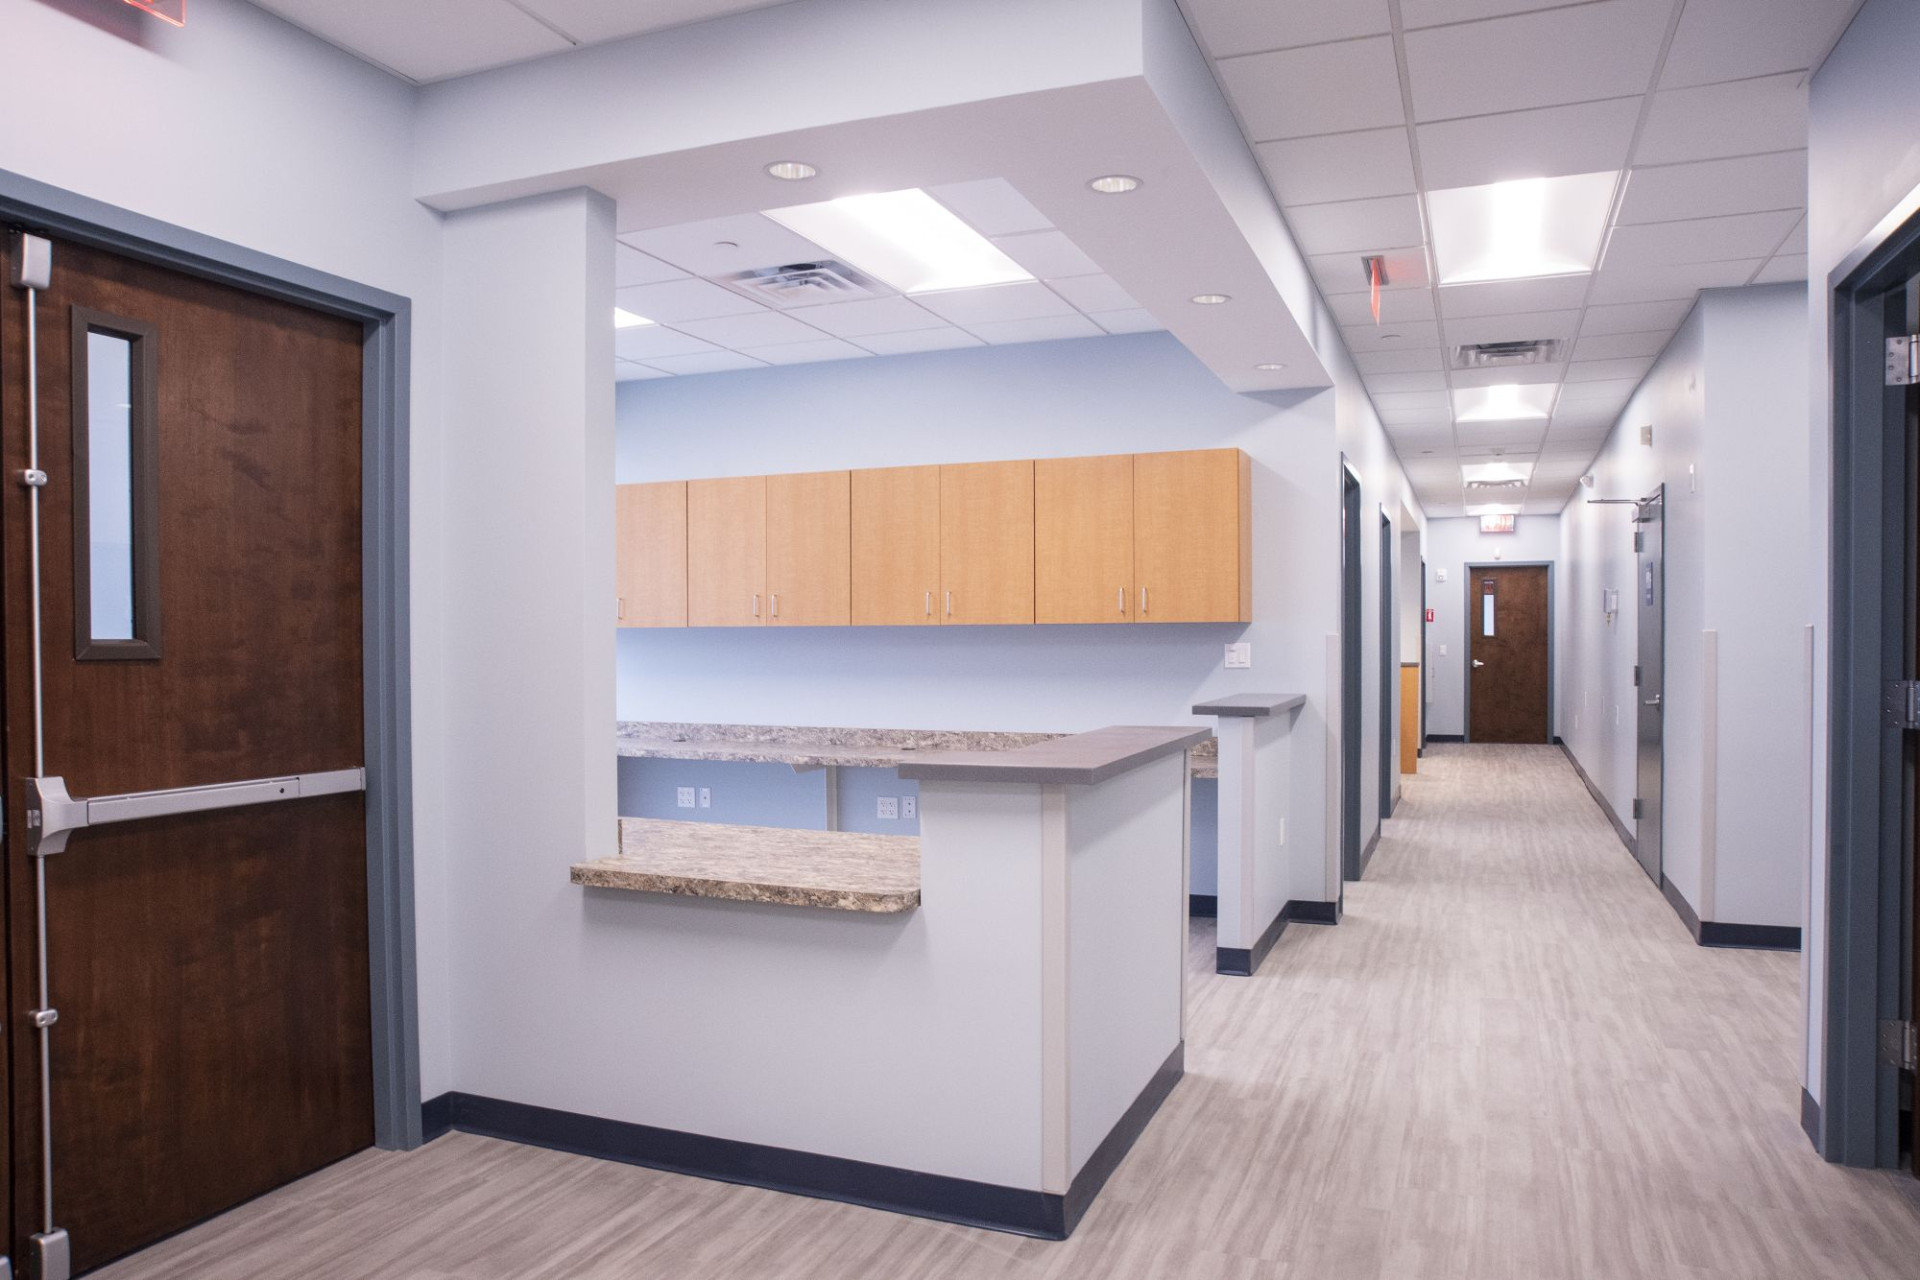 Premier Medical Group office space and hallway